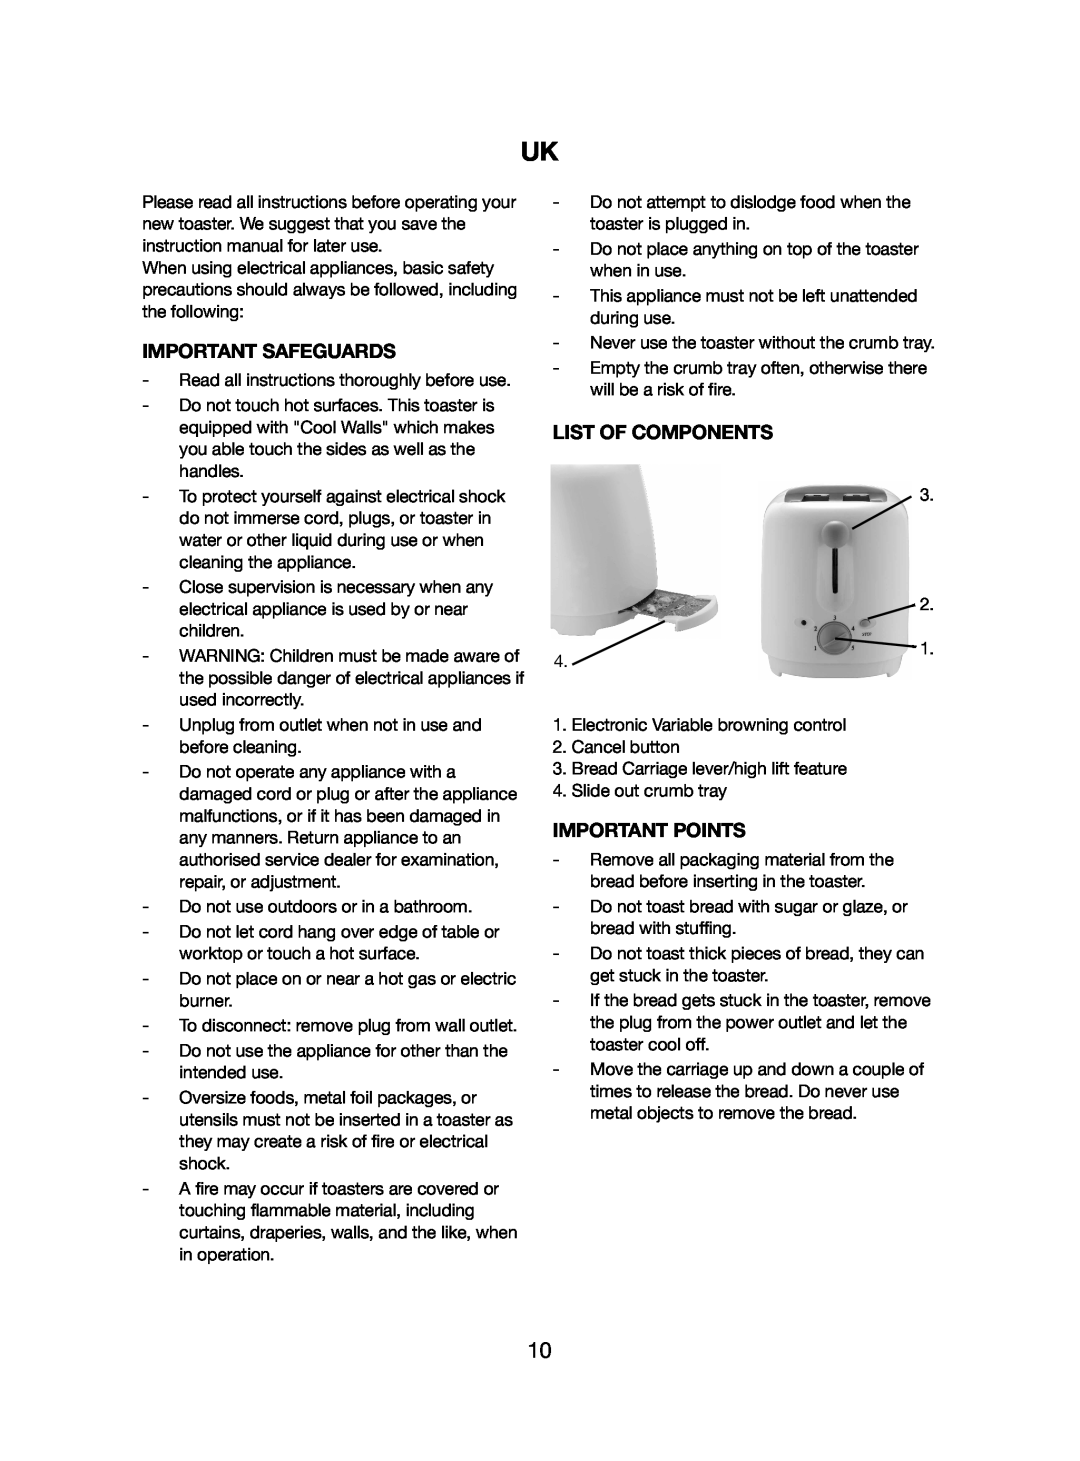 Melissa 743-196 manual Important Safeguards, List Of Components, Important Points 